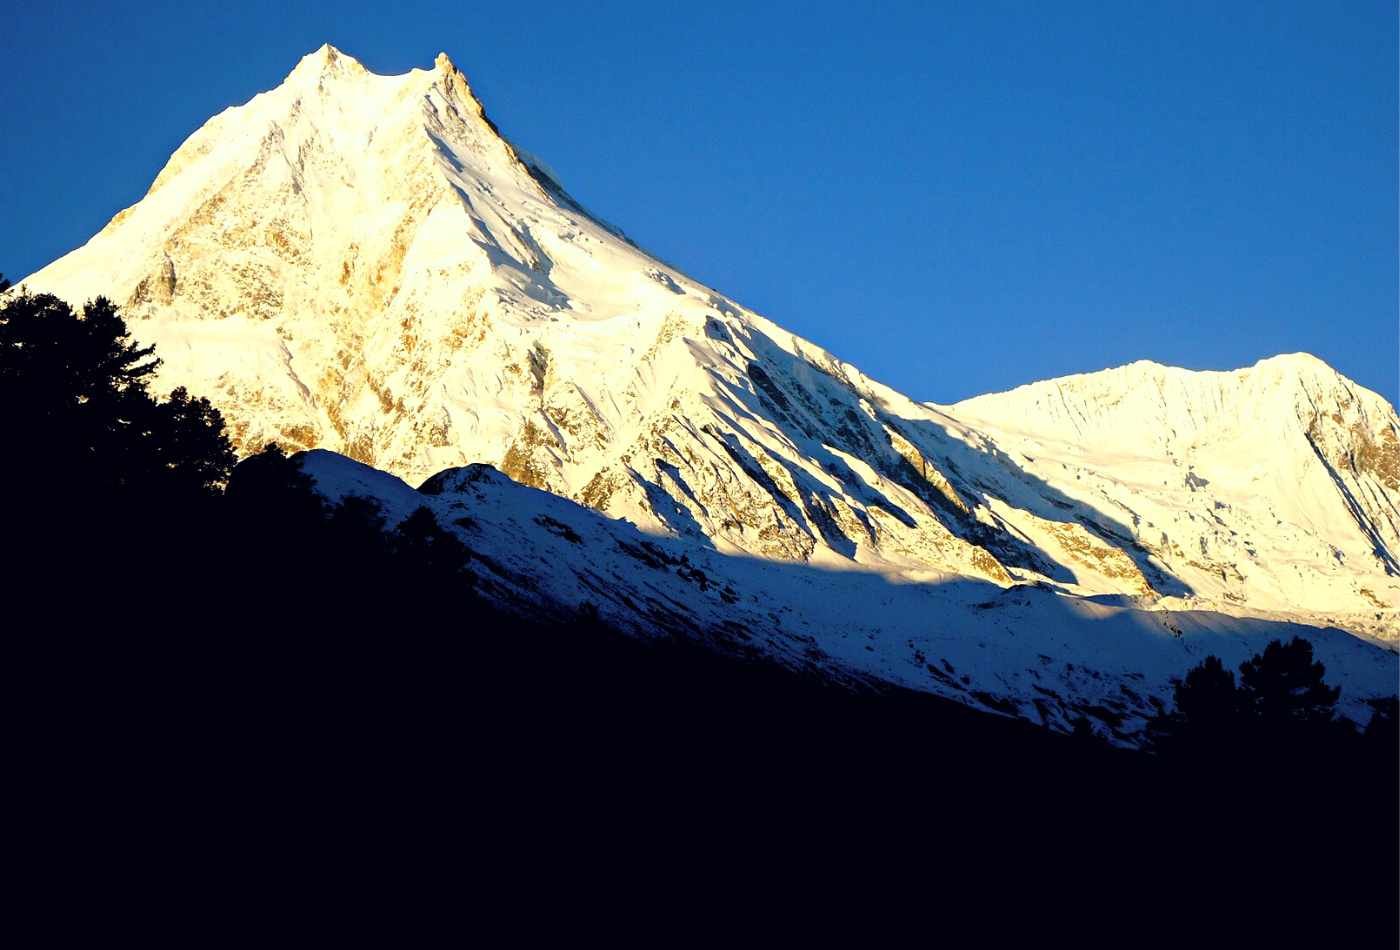 A breathtaking image of Mt. Manaslu at sunrise, captured from Lho village. The summit is covered in snow, highlighting its grandeur and magnificence.